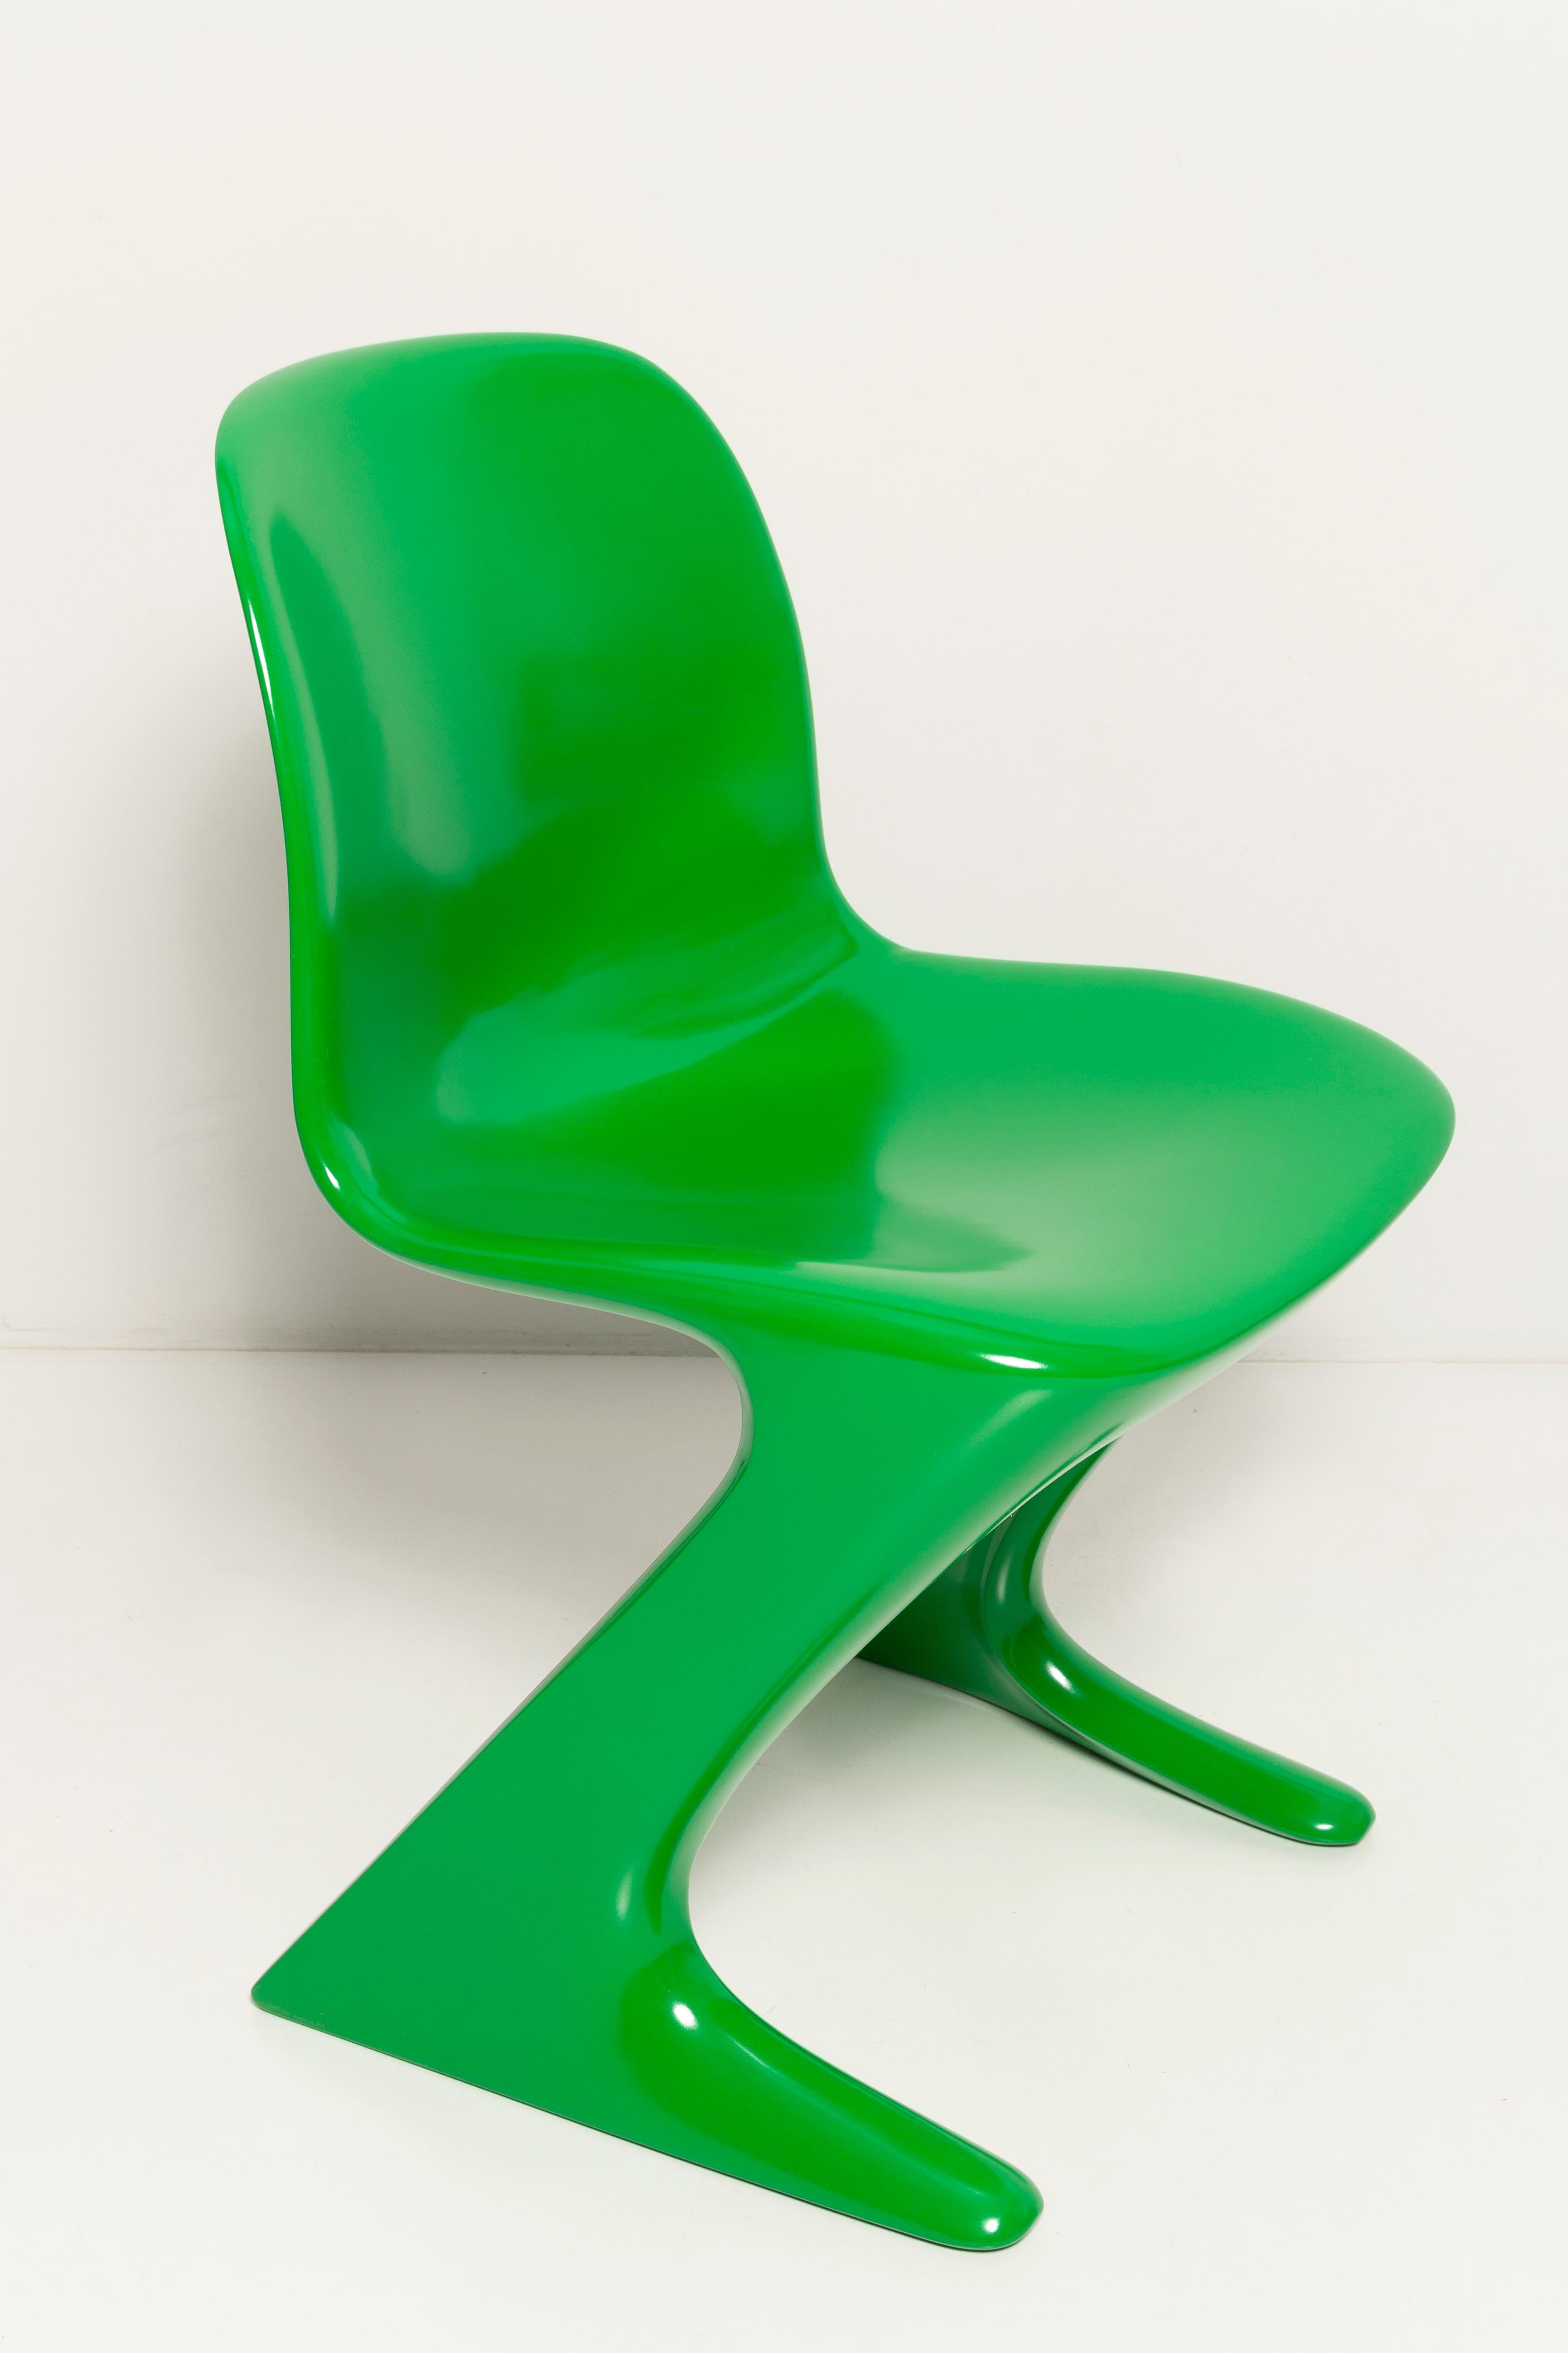 This model is called Z-chair. Designed in 1968 in the GDR by Ernst Moeckl and Siegfried Mehl, German Version of the Panton chair. Also called kangoroo chair or variopur chair. Produced in eastern Germany.

Chair is after renovation - new semi